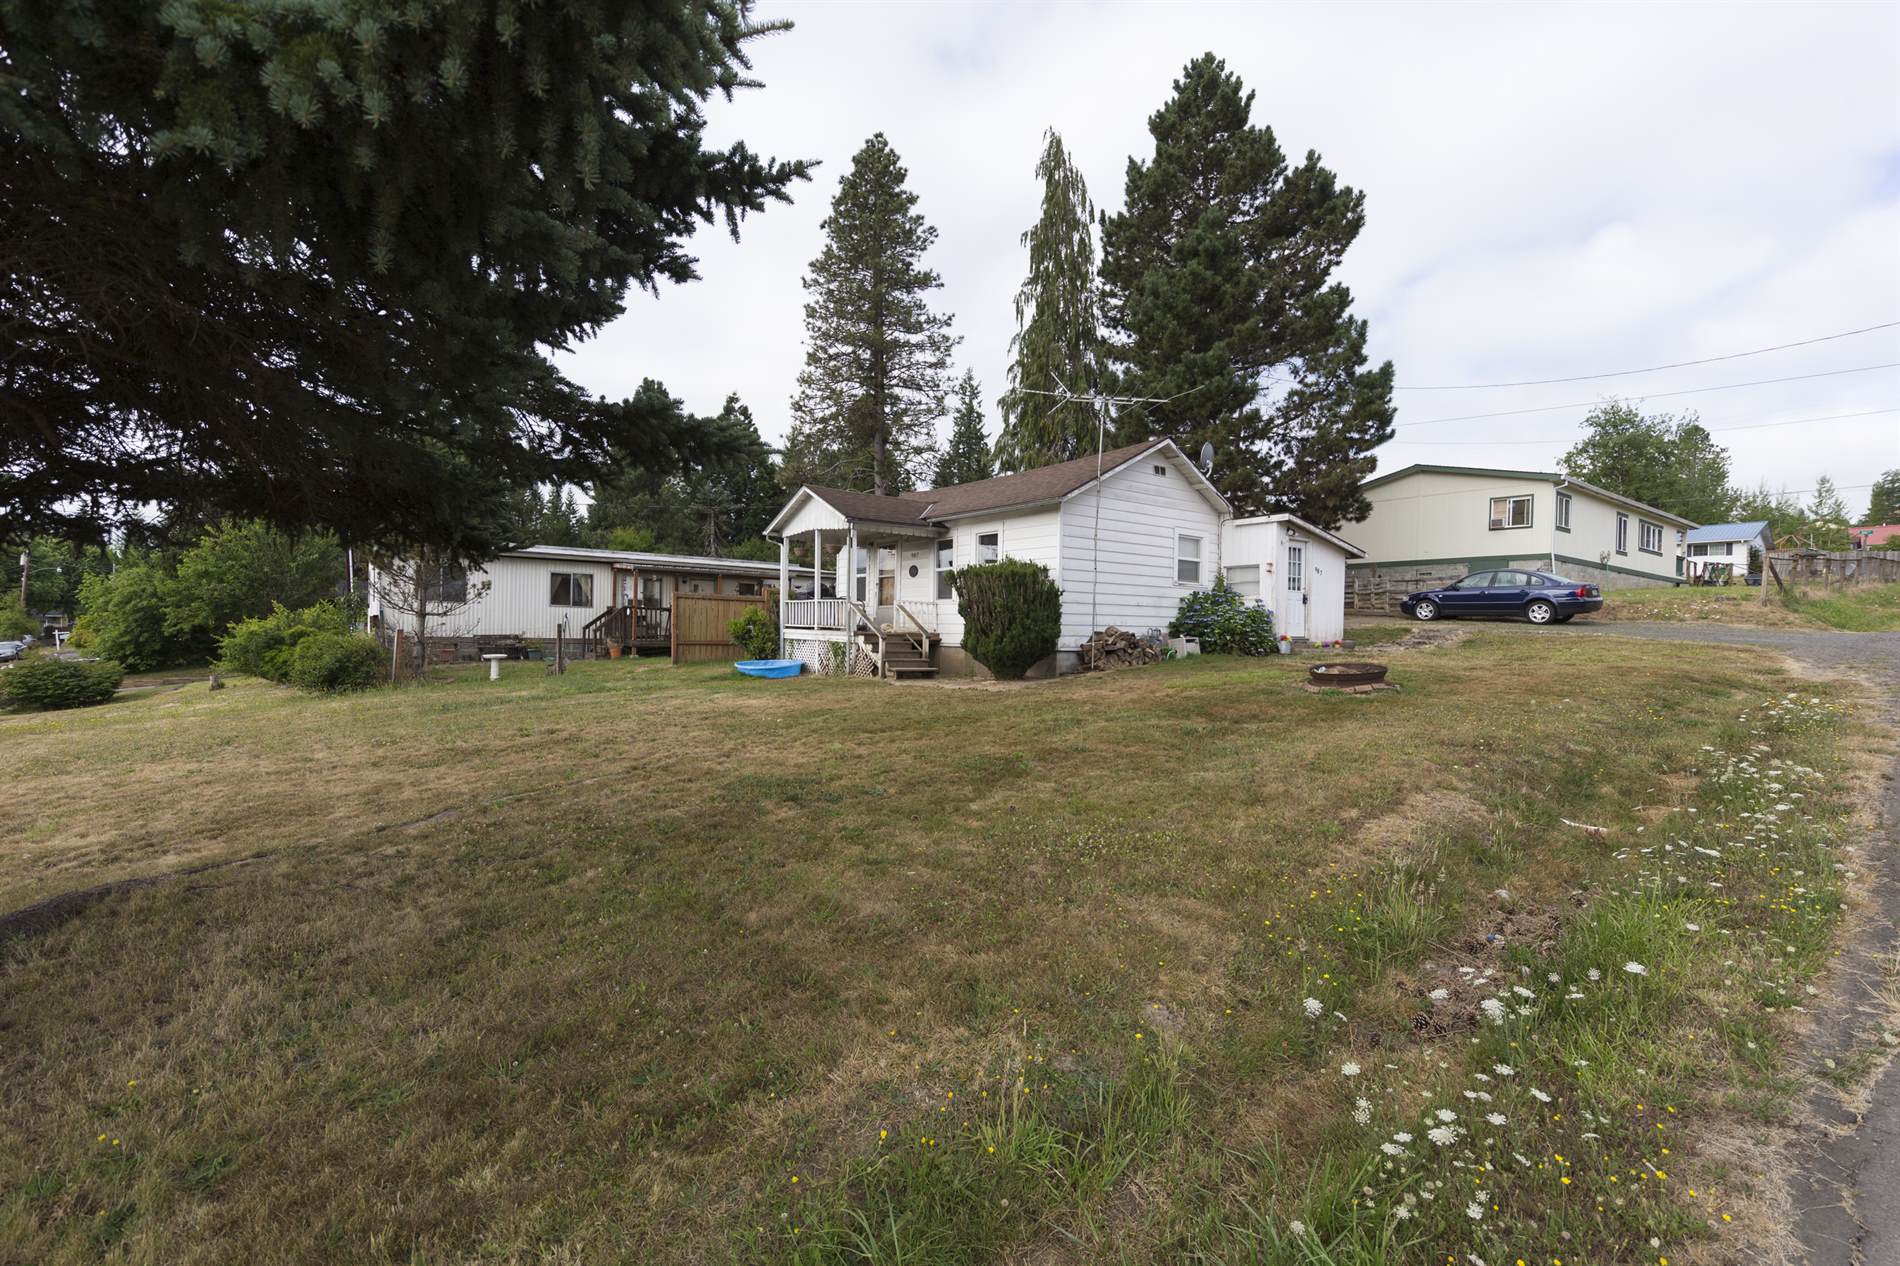 987 2nd Ave., Vernonia, OR 97064